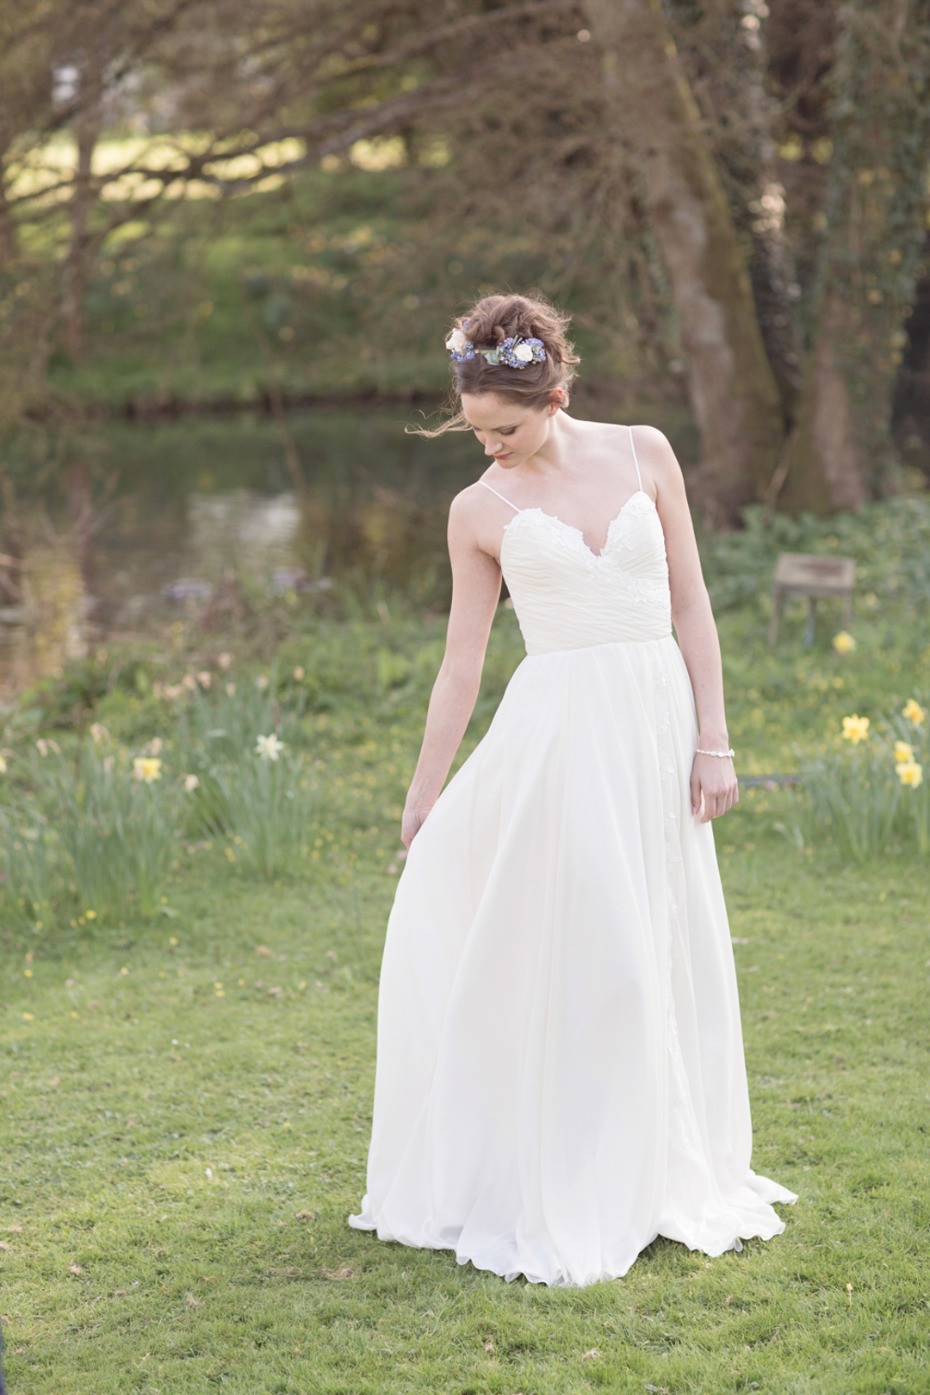 Elegant gown inspired by Sense and Sensibility